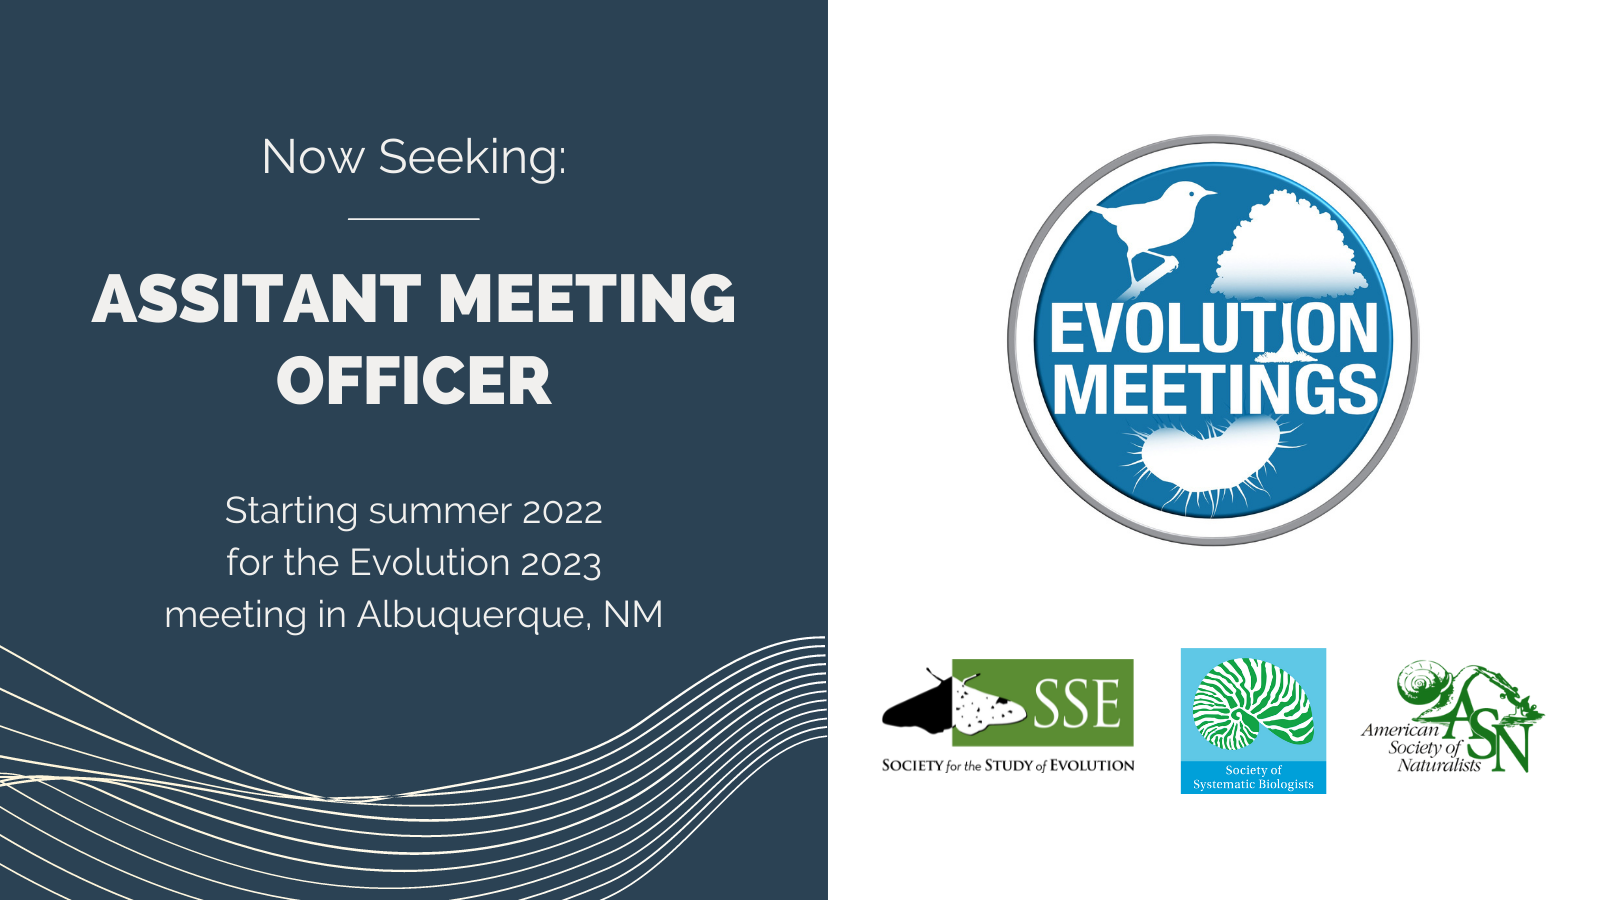 White and dark blue background. Text: Now Seeking: Assistant Meeting Officer, Starting summer 2022 for the Evolution 2023 meeting in Albuquerque, NM. Logos: Evolution Meetings, Society for the Study of Evolution, Society of Systematic Biologists, American Society of Naturalists.